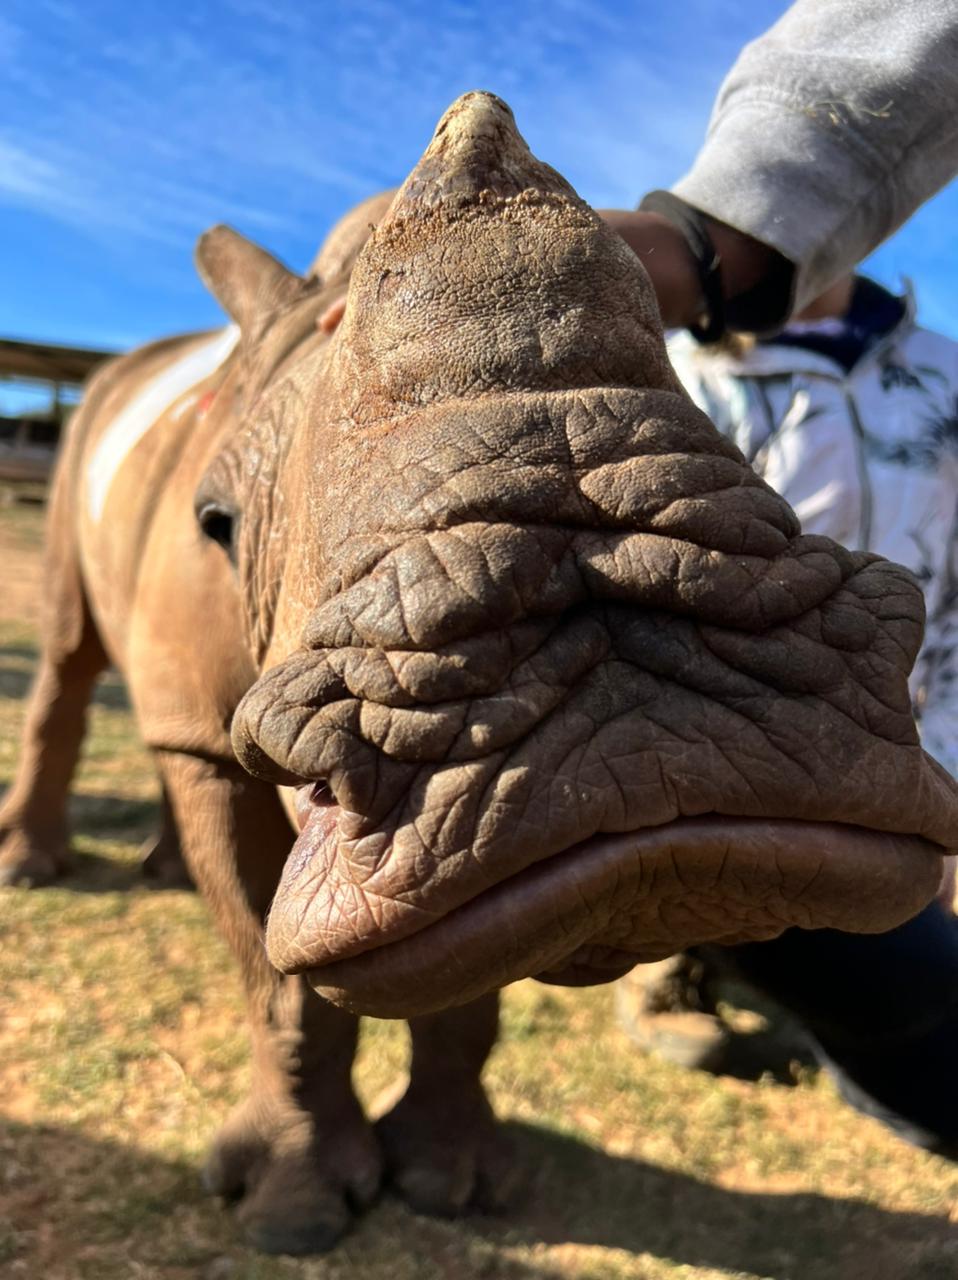 Rhino Conservation and Management - Loop Abroad - Veterinary